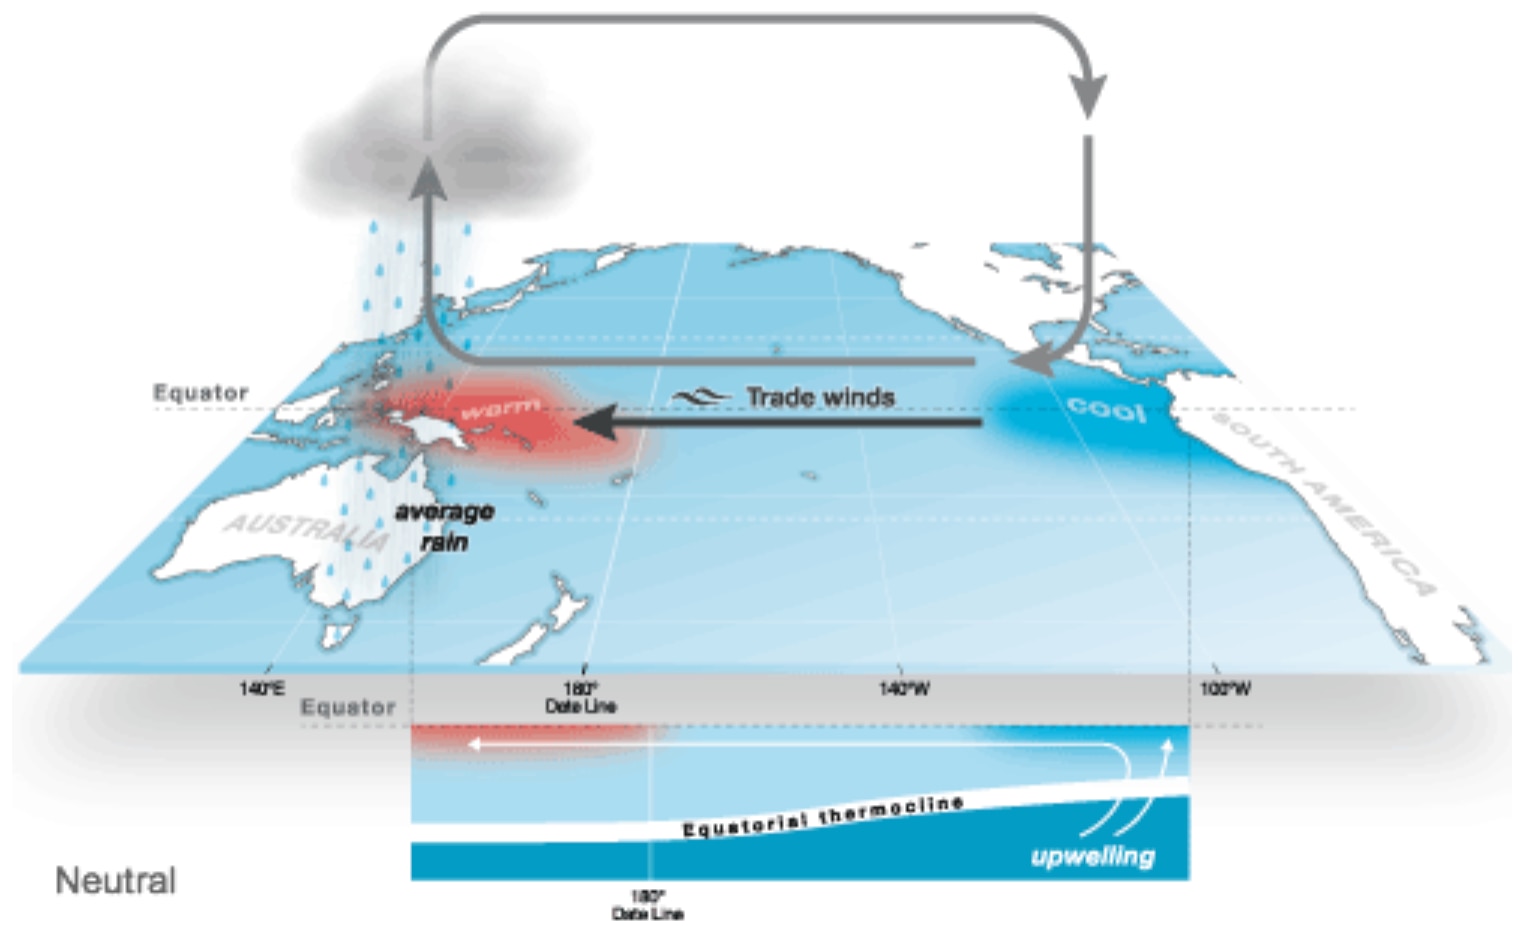 Pacific Ocean – even in neutral state the Western Pacific is warm.